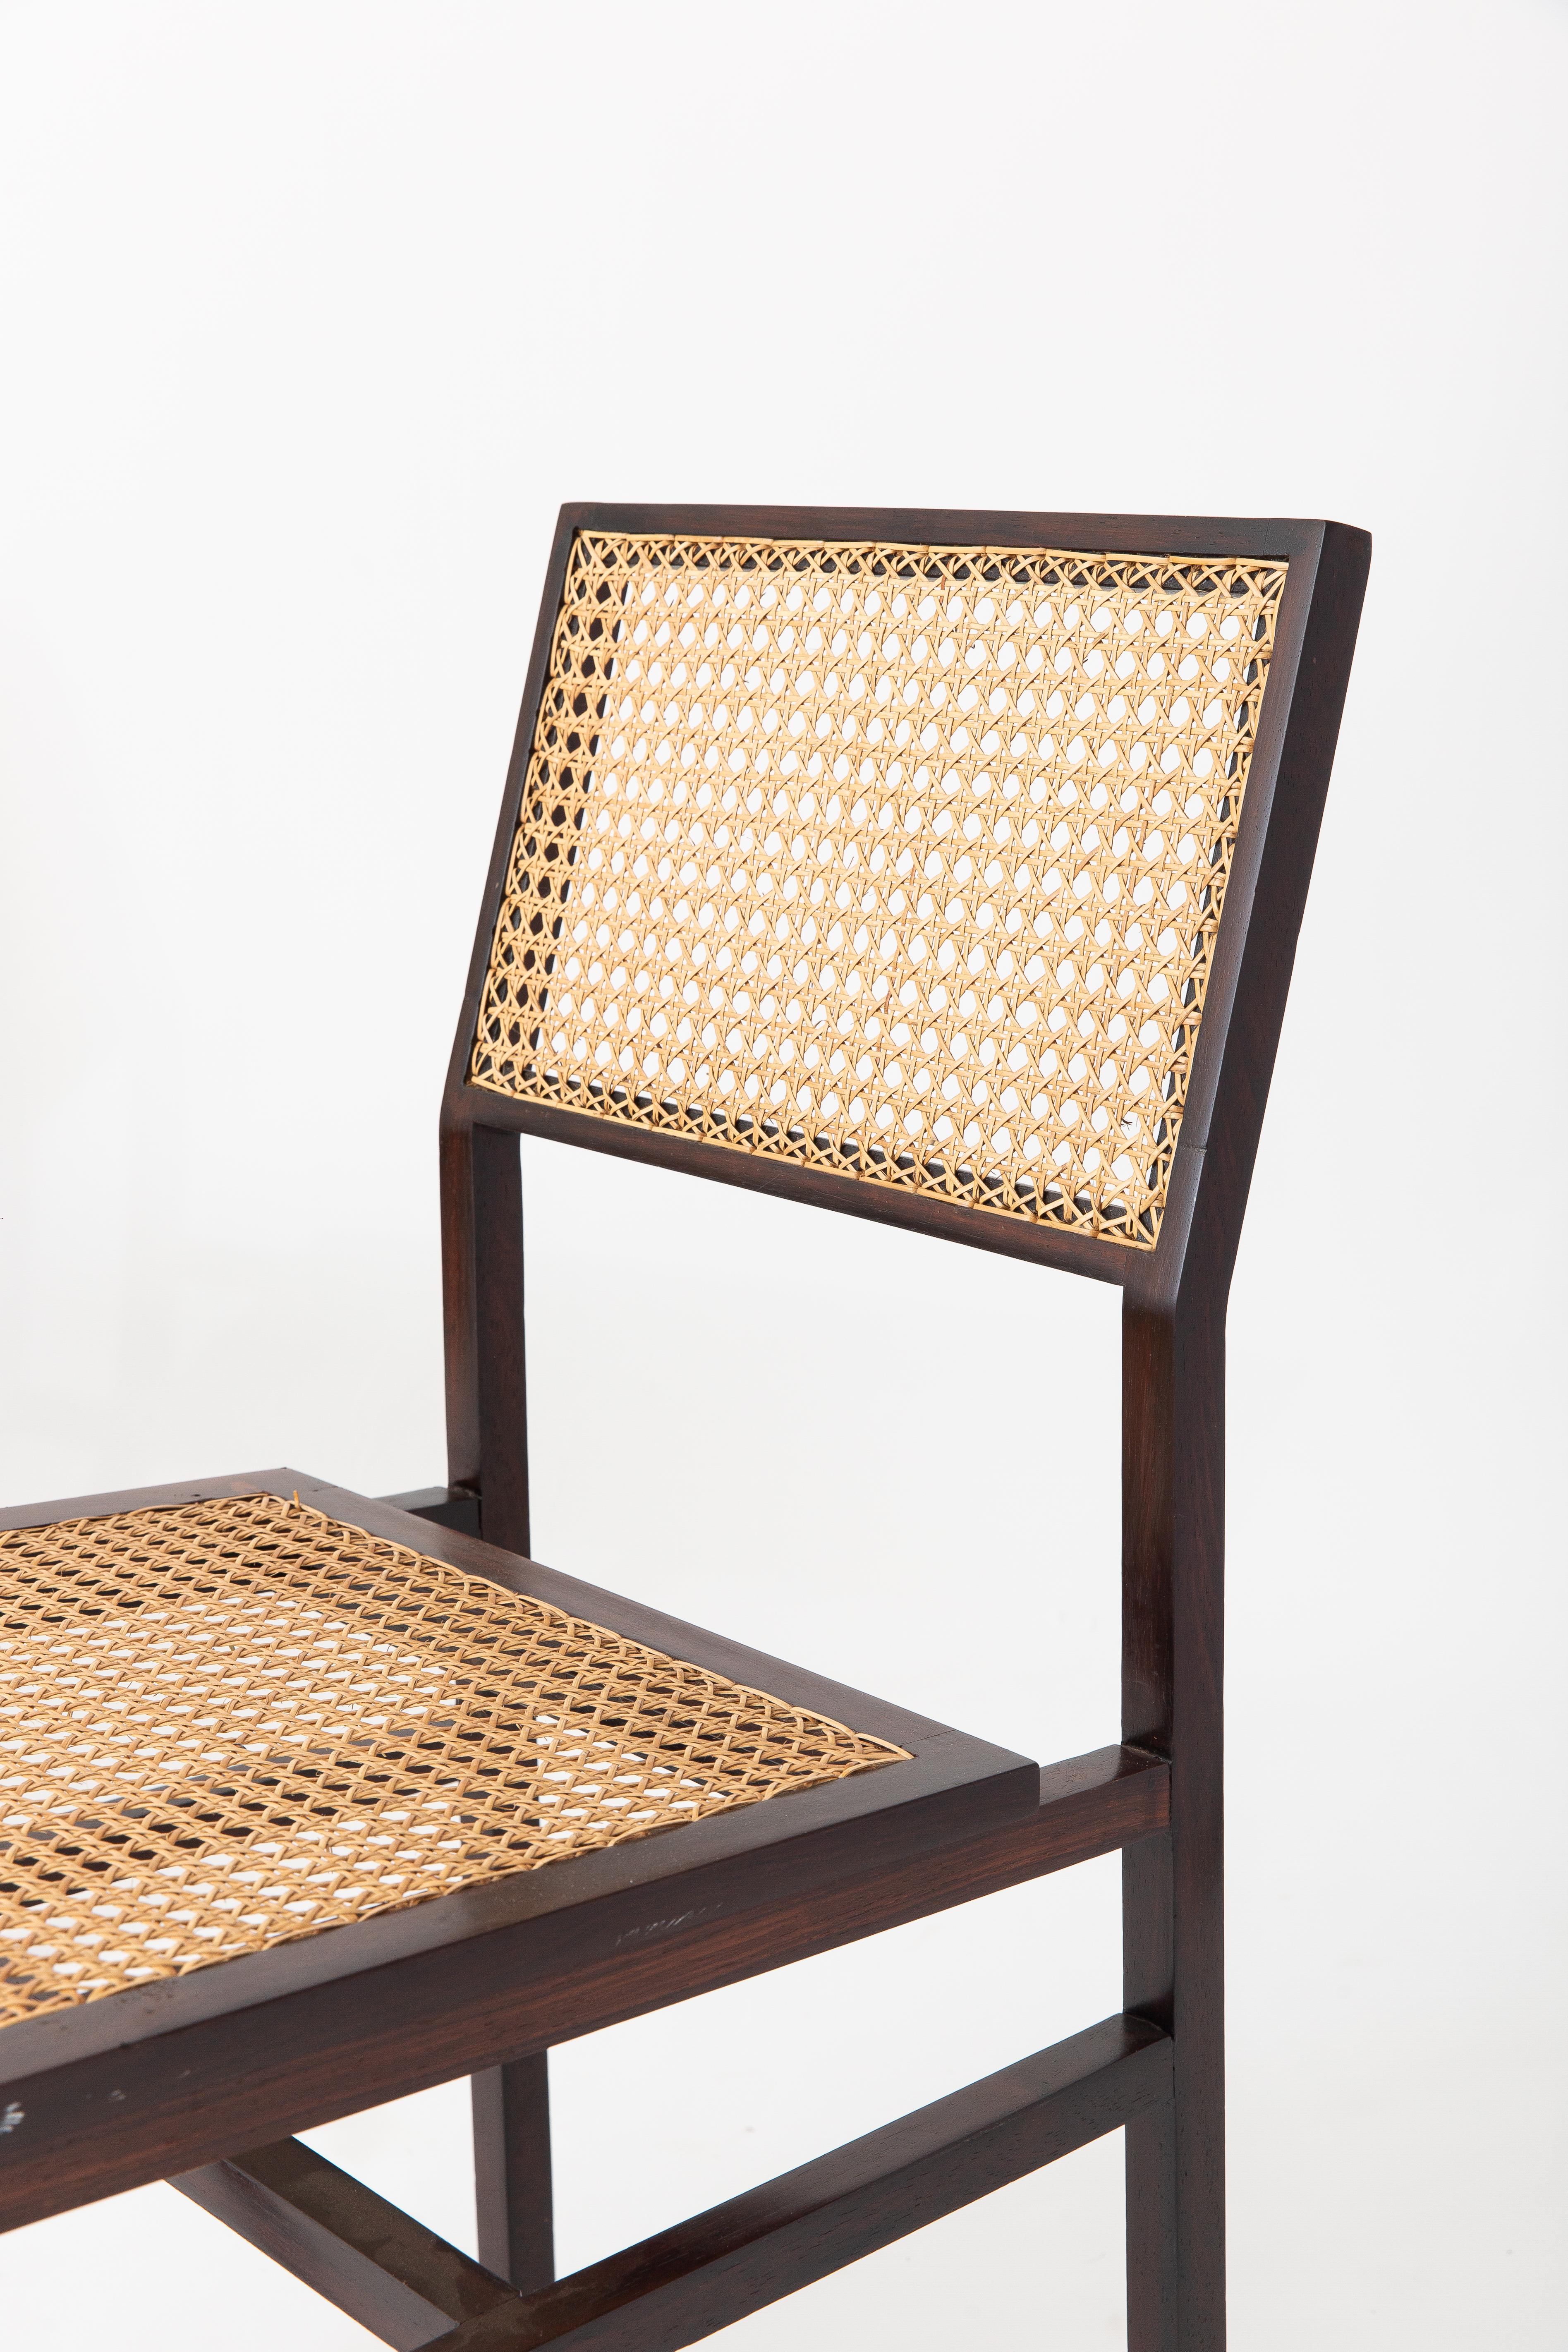 Beautiful pair of vintage Brazilian wood and woven palinha chairs from Tenreiro Arquitetura with original label on one of the chairs. 